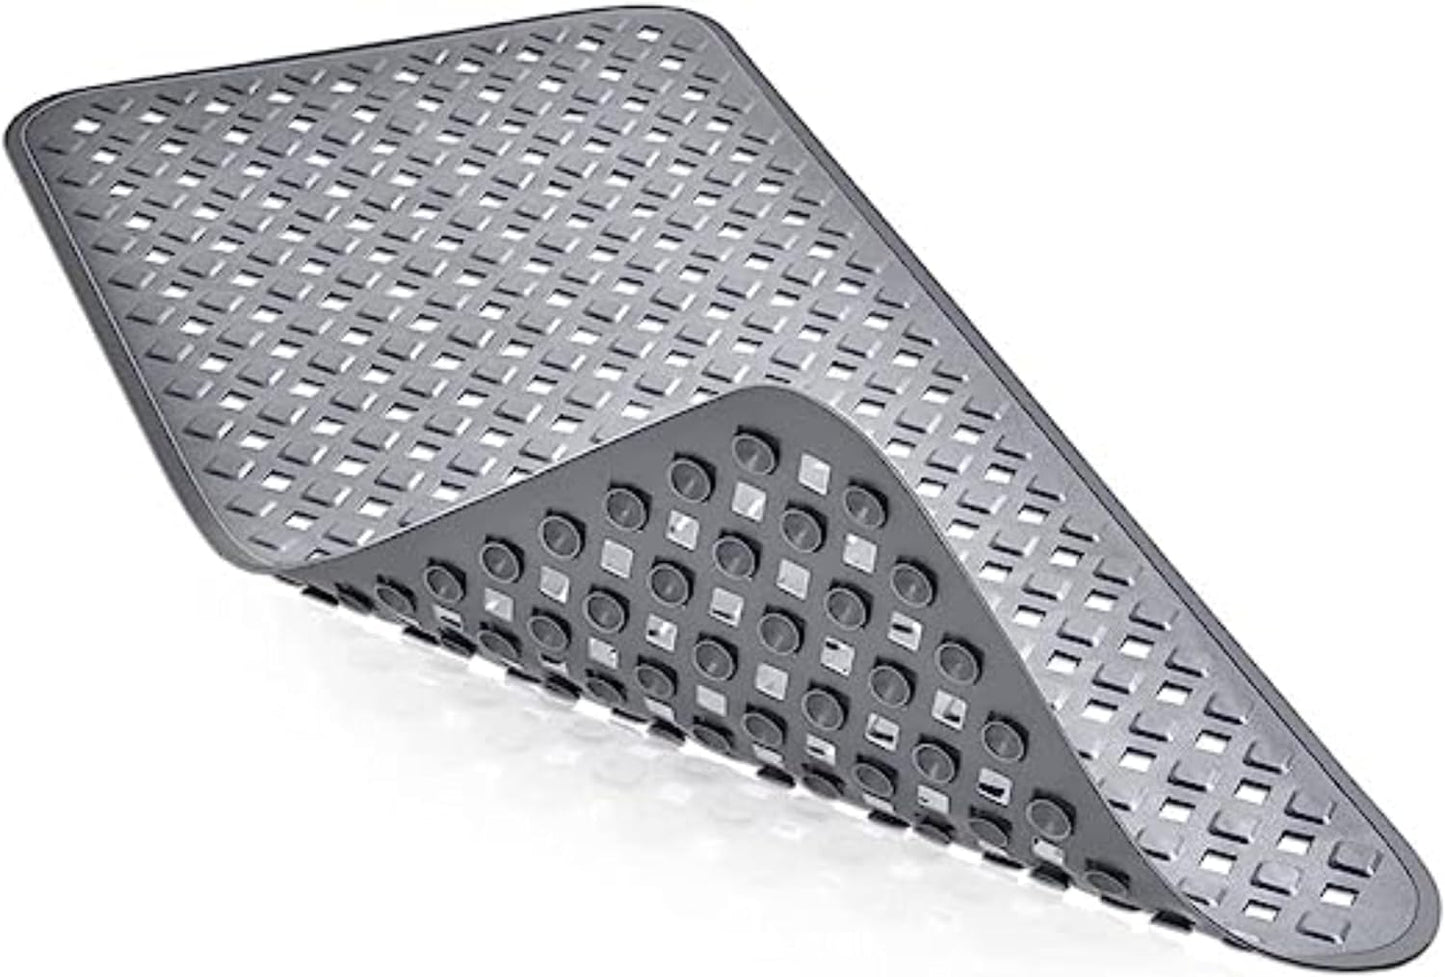 Bathtub Anti-Slip Mat, TPE, Large, 15.7 x 34.6 inches (40 x 88 cm), 260 Suction Cups Included, Soft, Prevents Falls, Antibacterial, Anti-Mildew, Anti-Aging, Nursing, Bath Mat, Suitable for Bathrooms, Washing Places, Entrance Entrances, Gray